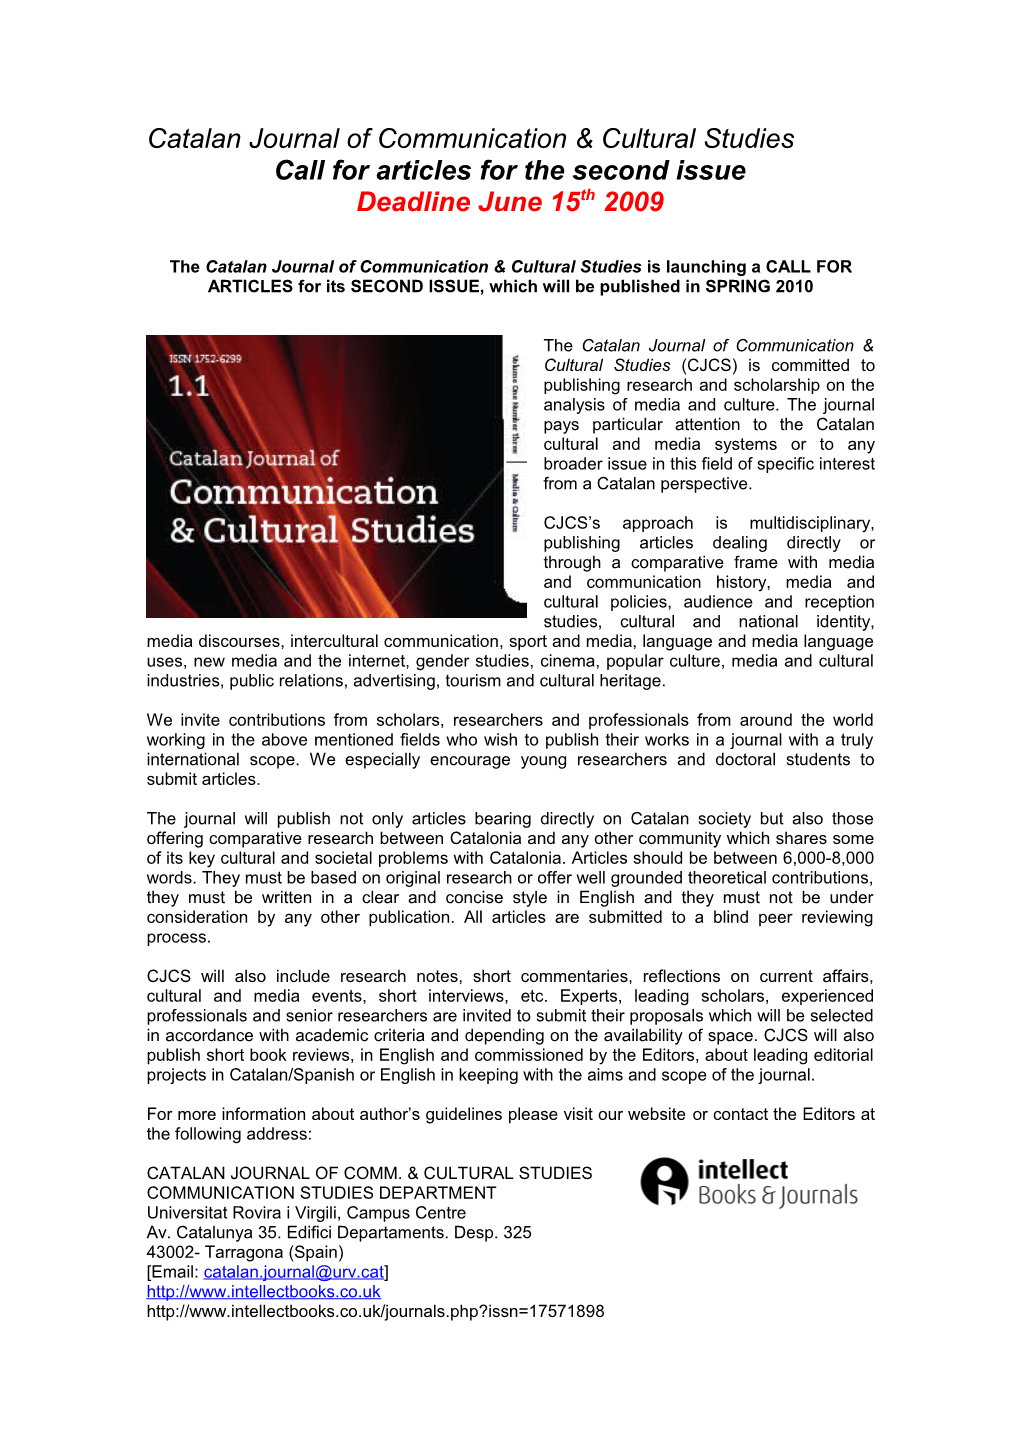 Catalan Journal of Communication and Cultural Studies